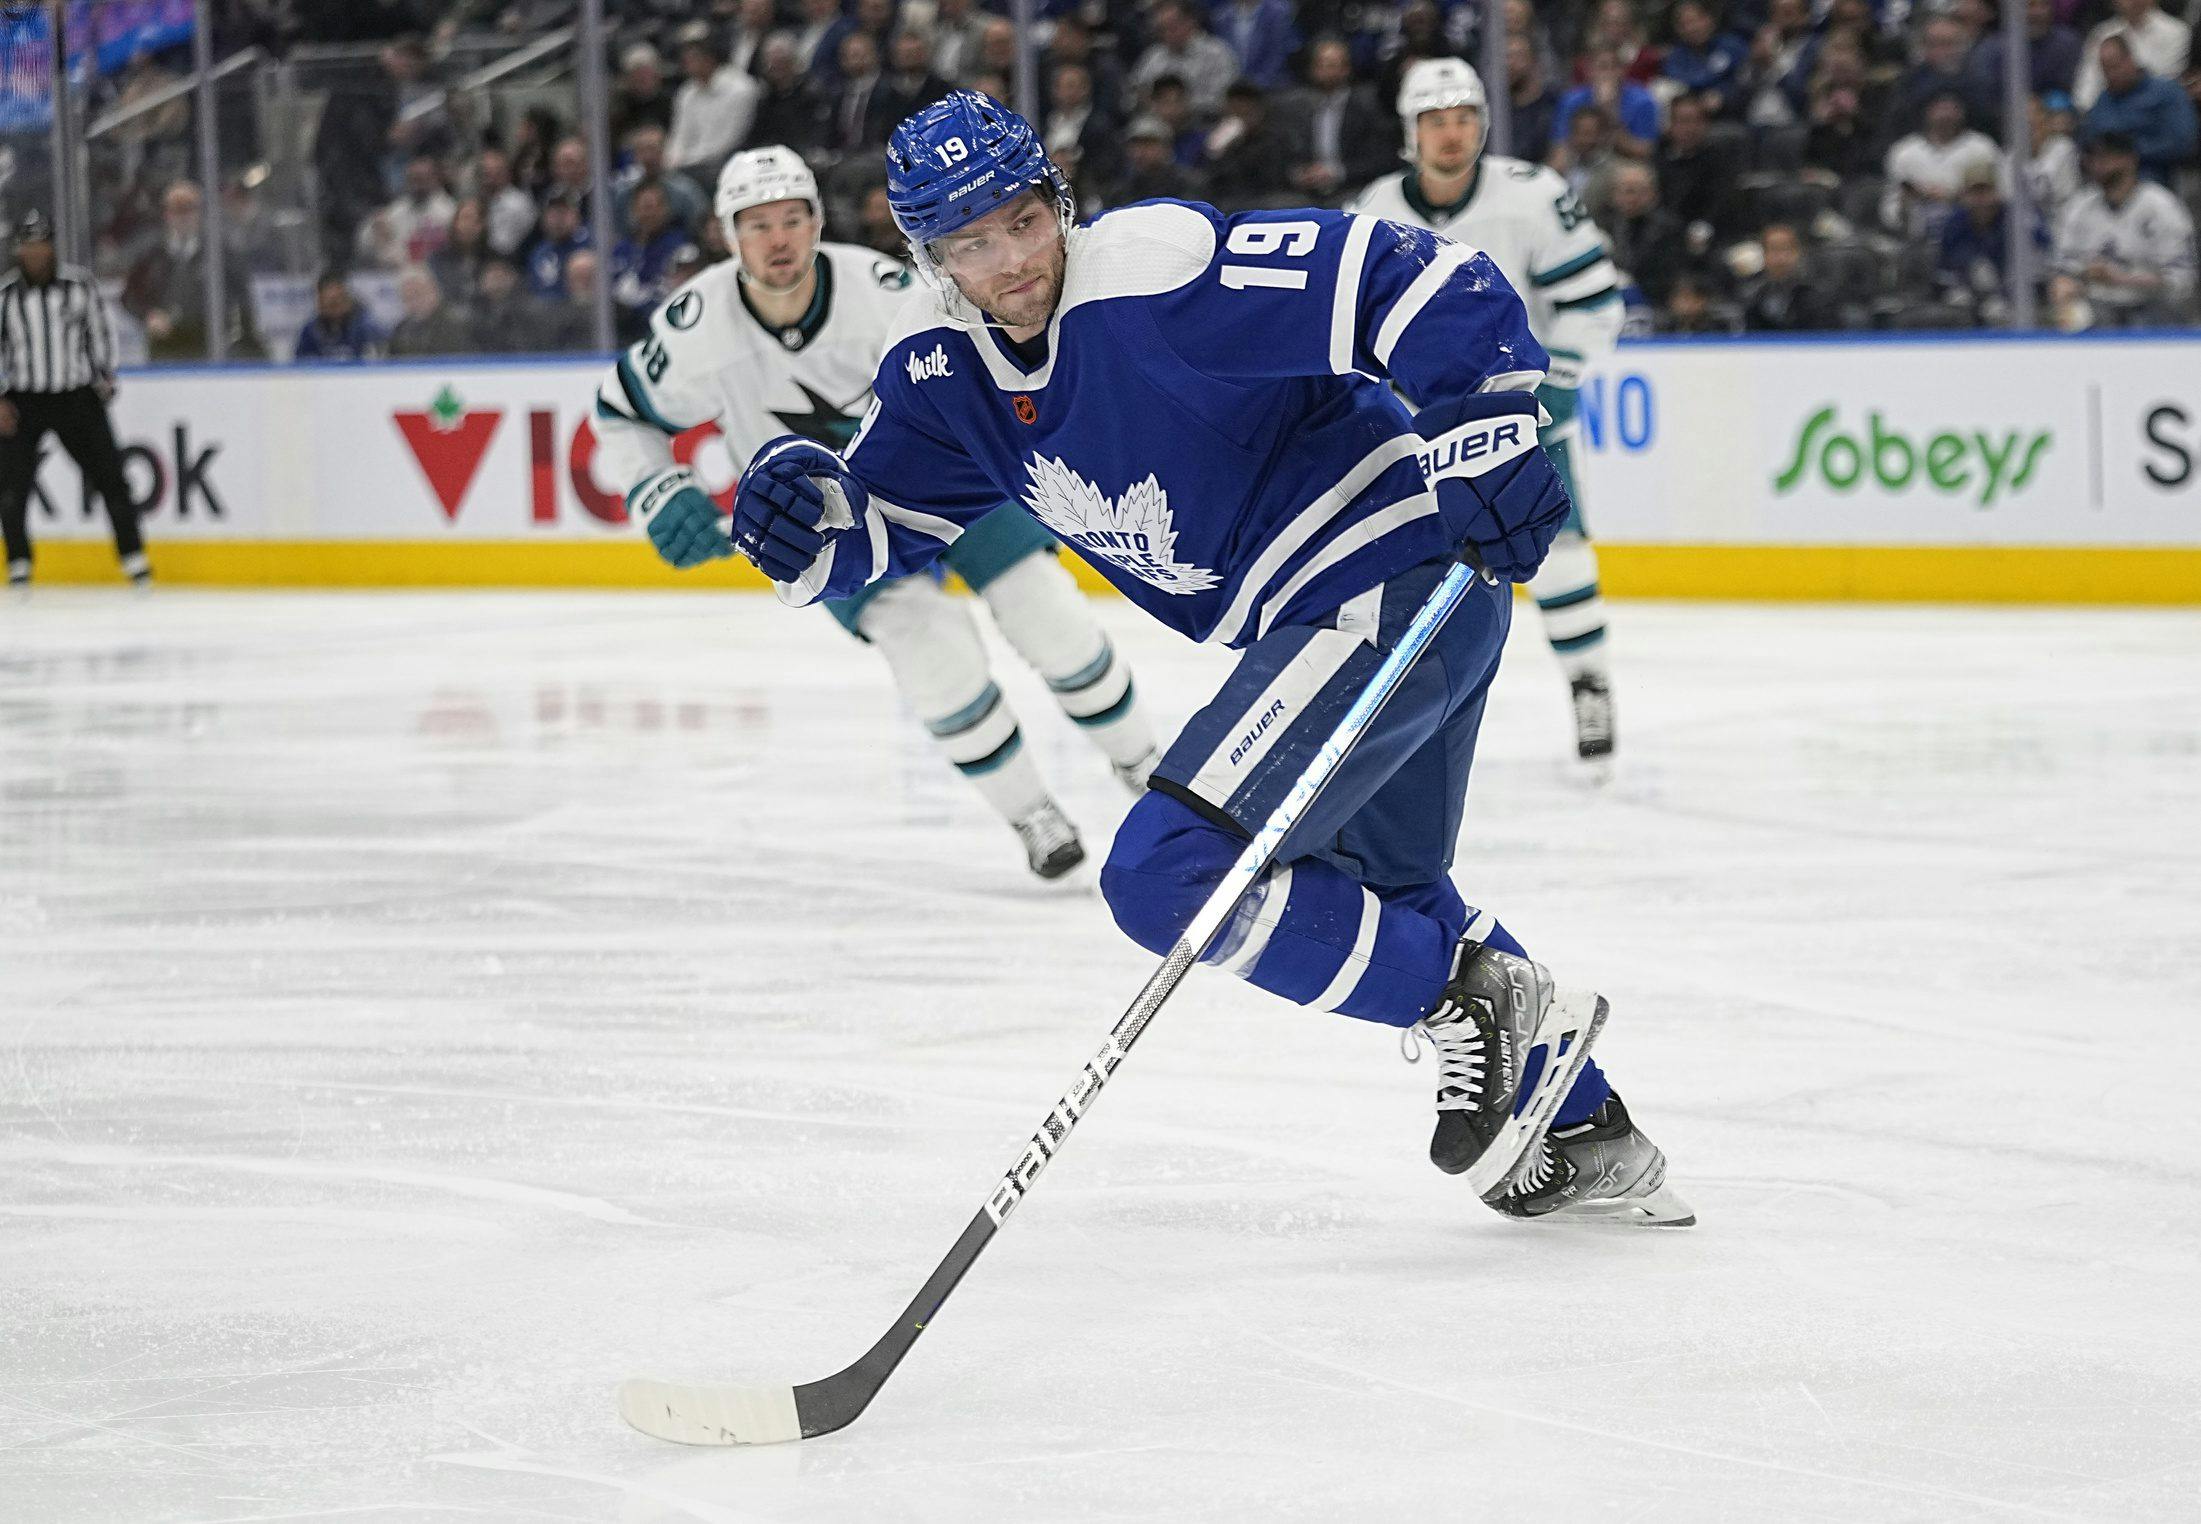 Toronto Maple Leafs’ Calle Jarnkrok expected to miss the next two weeks with groin injury